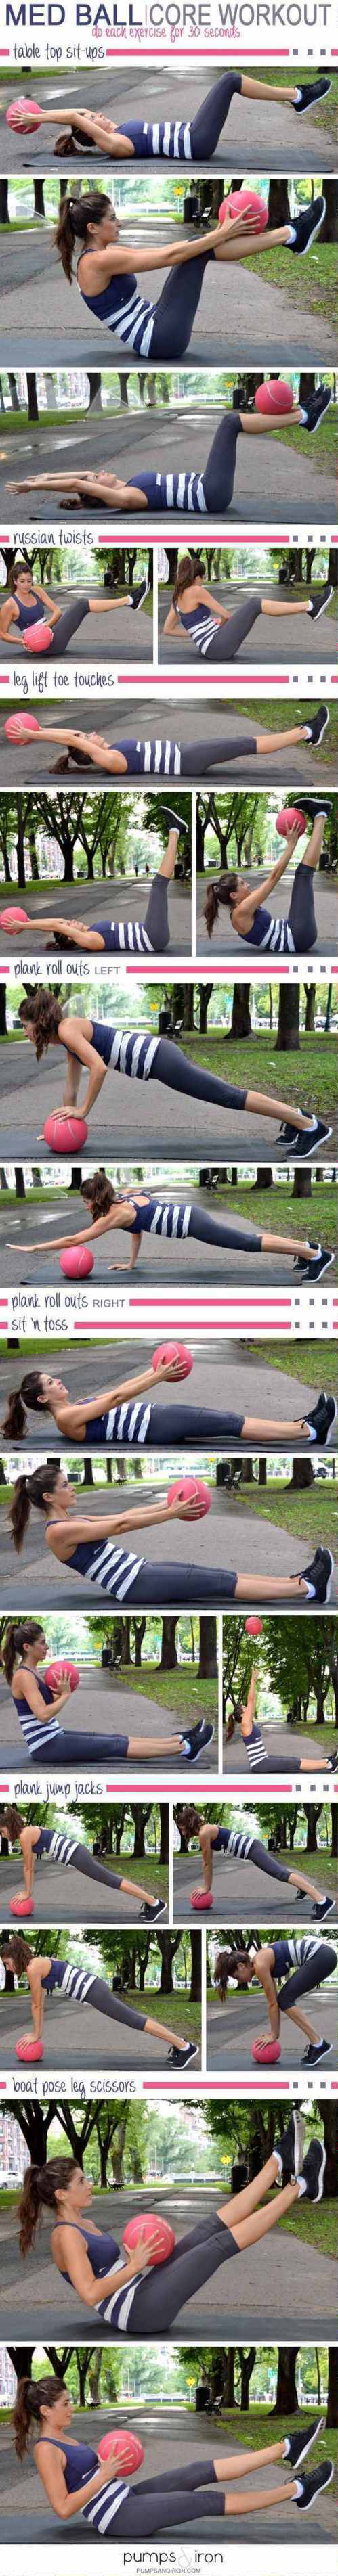 Workout with med ball